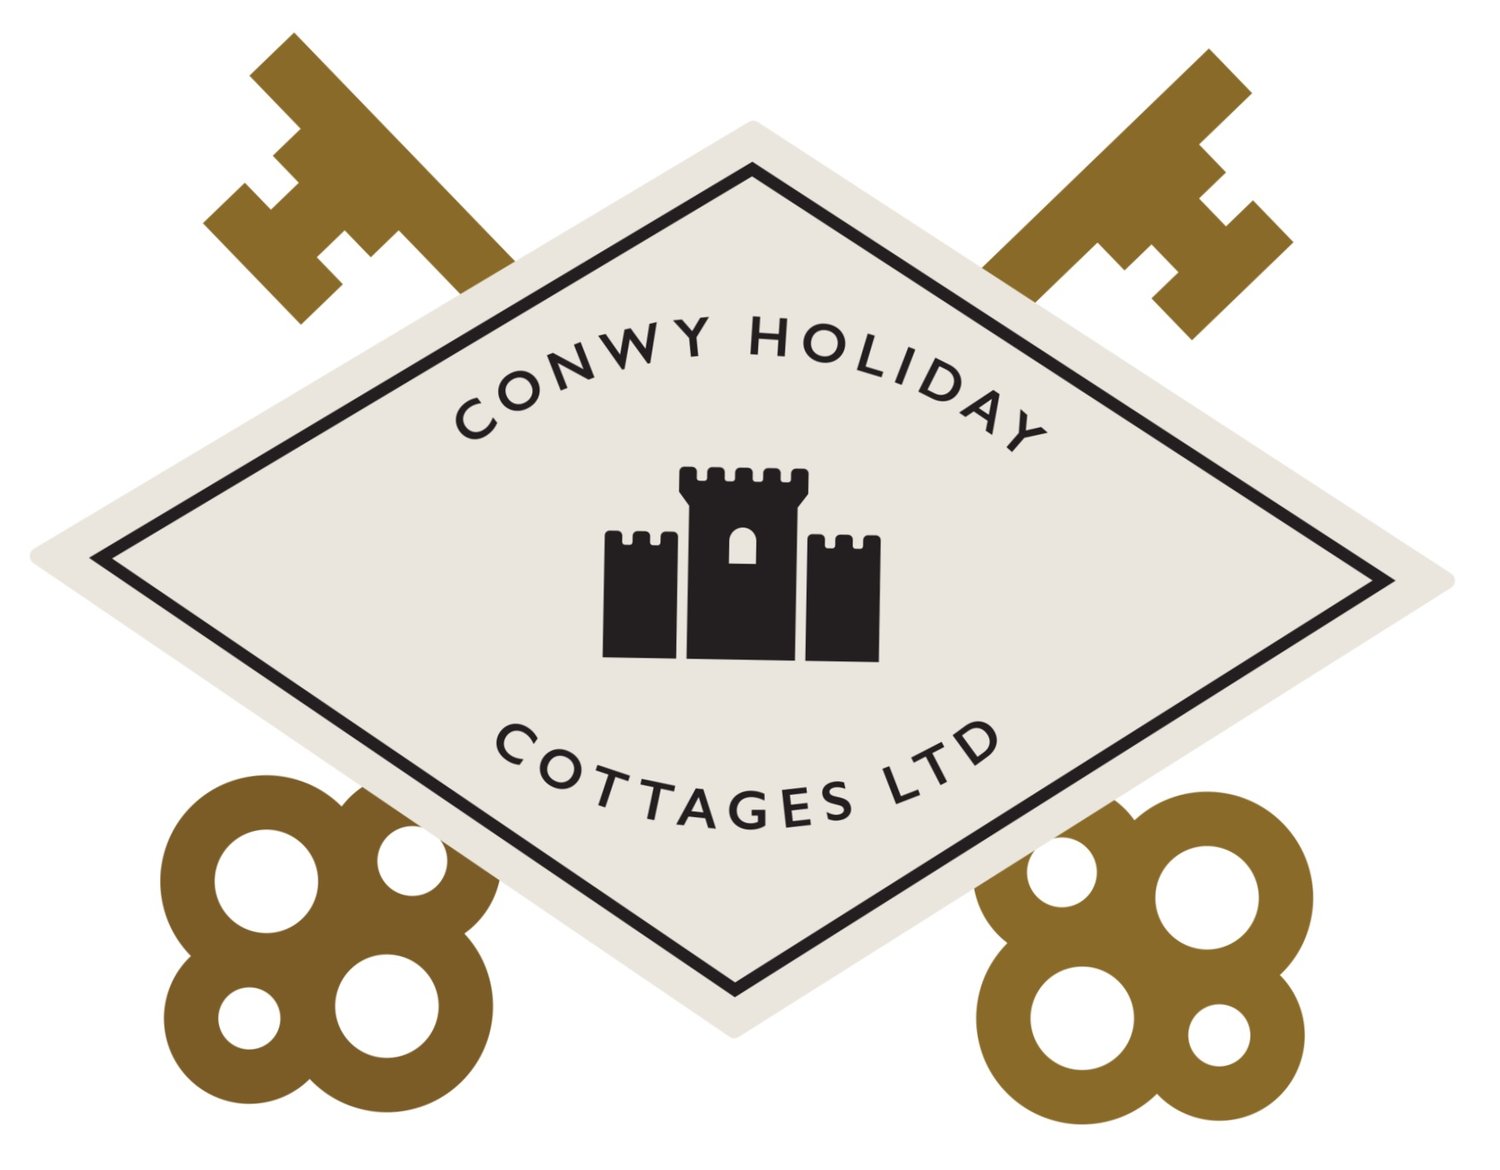 Conwy Holiday Cottages Ltd